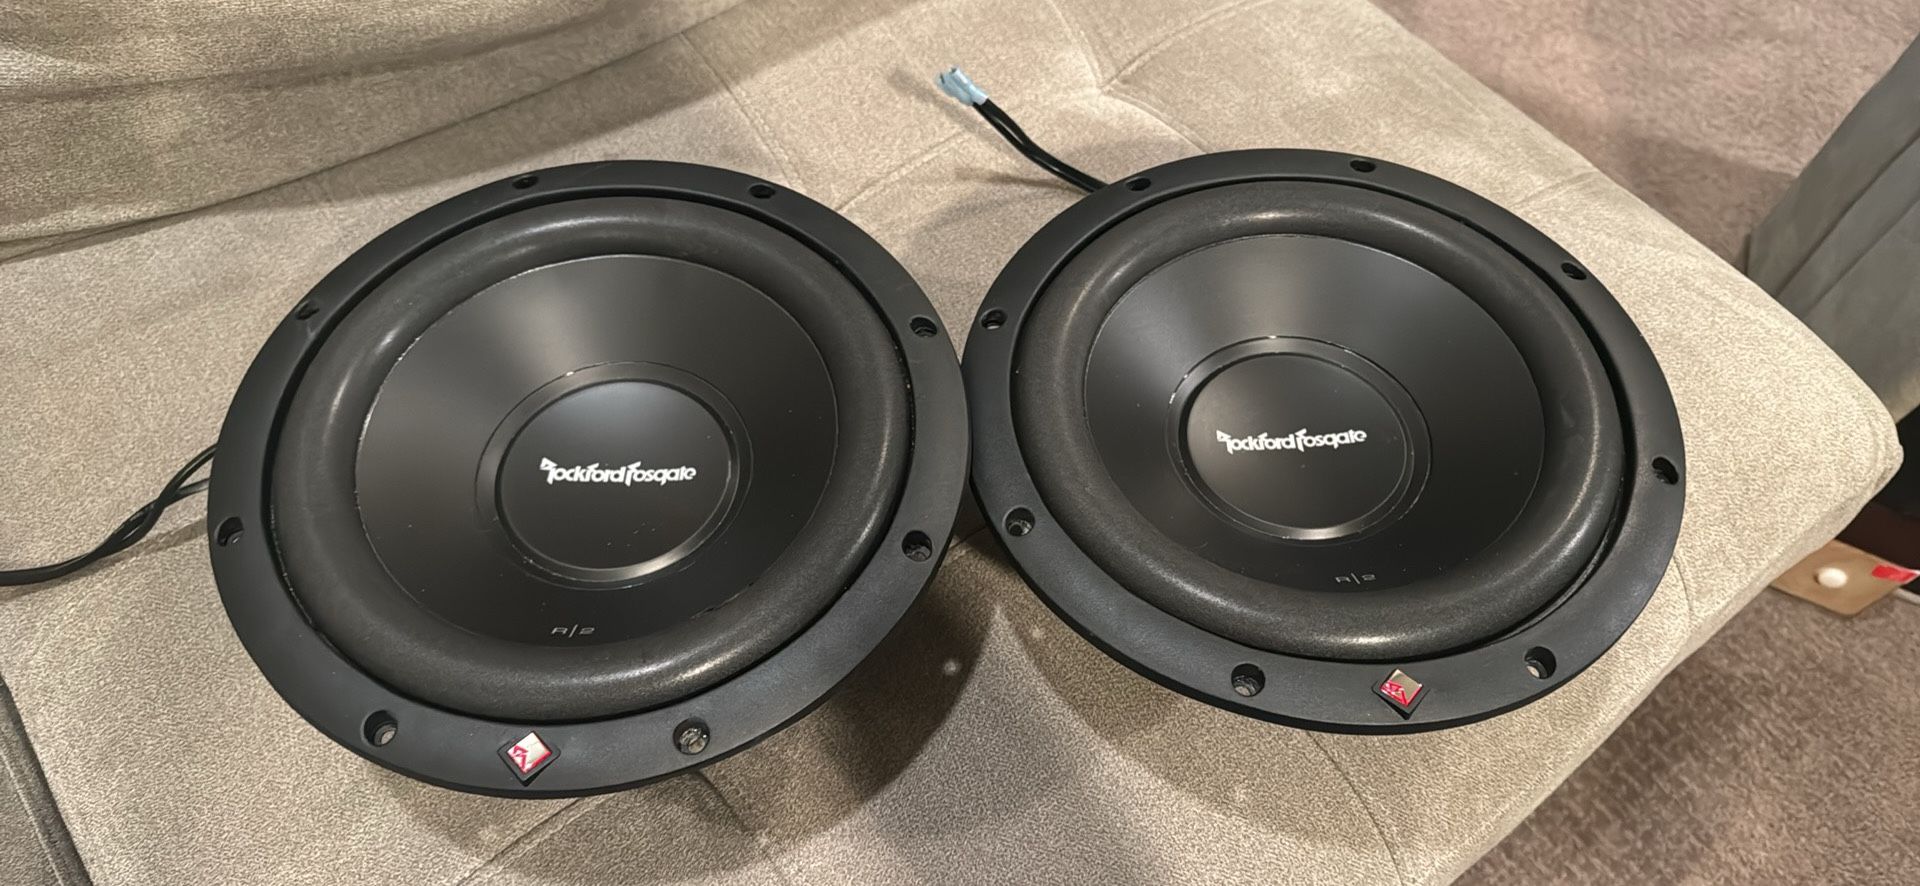 Rockford subwoofers